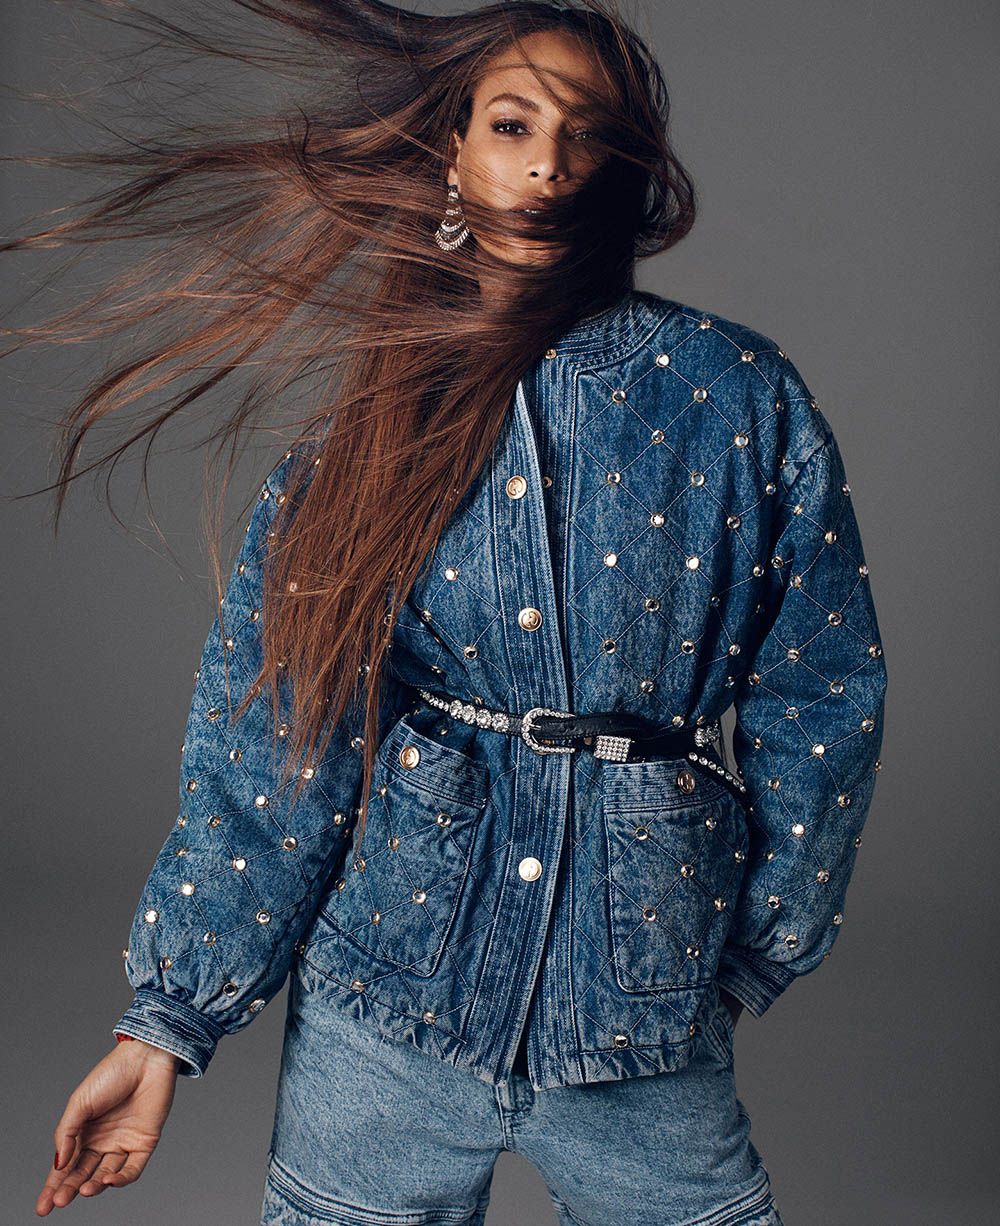 Joan Smalls by Alexi Lubomirski for Elle US April 2018